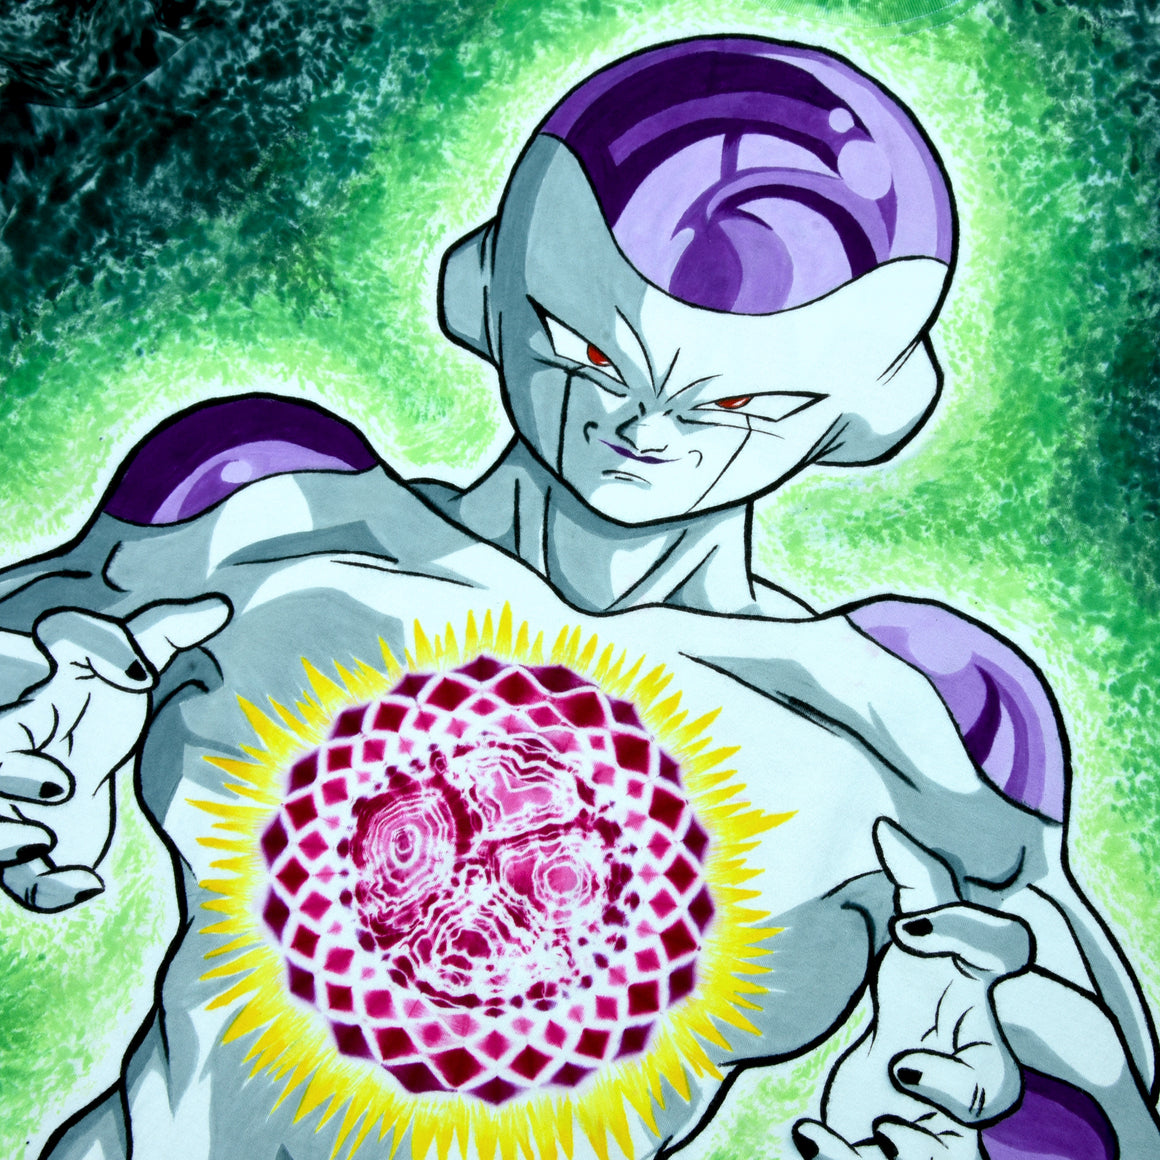 XL - Tie-dyed and Hand-dyed Anime Art T-Shirt - DBZ Frieza #1